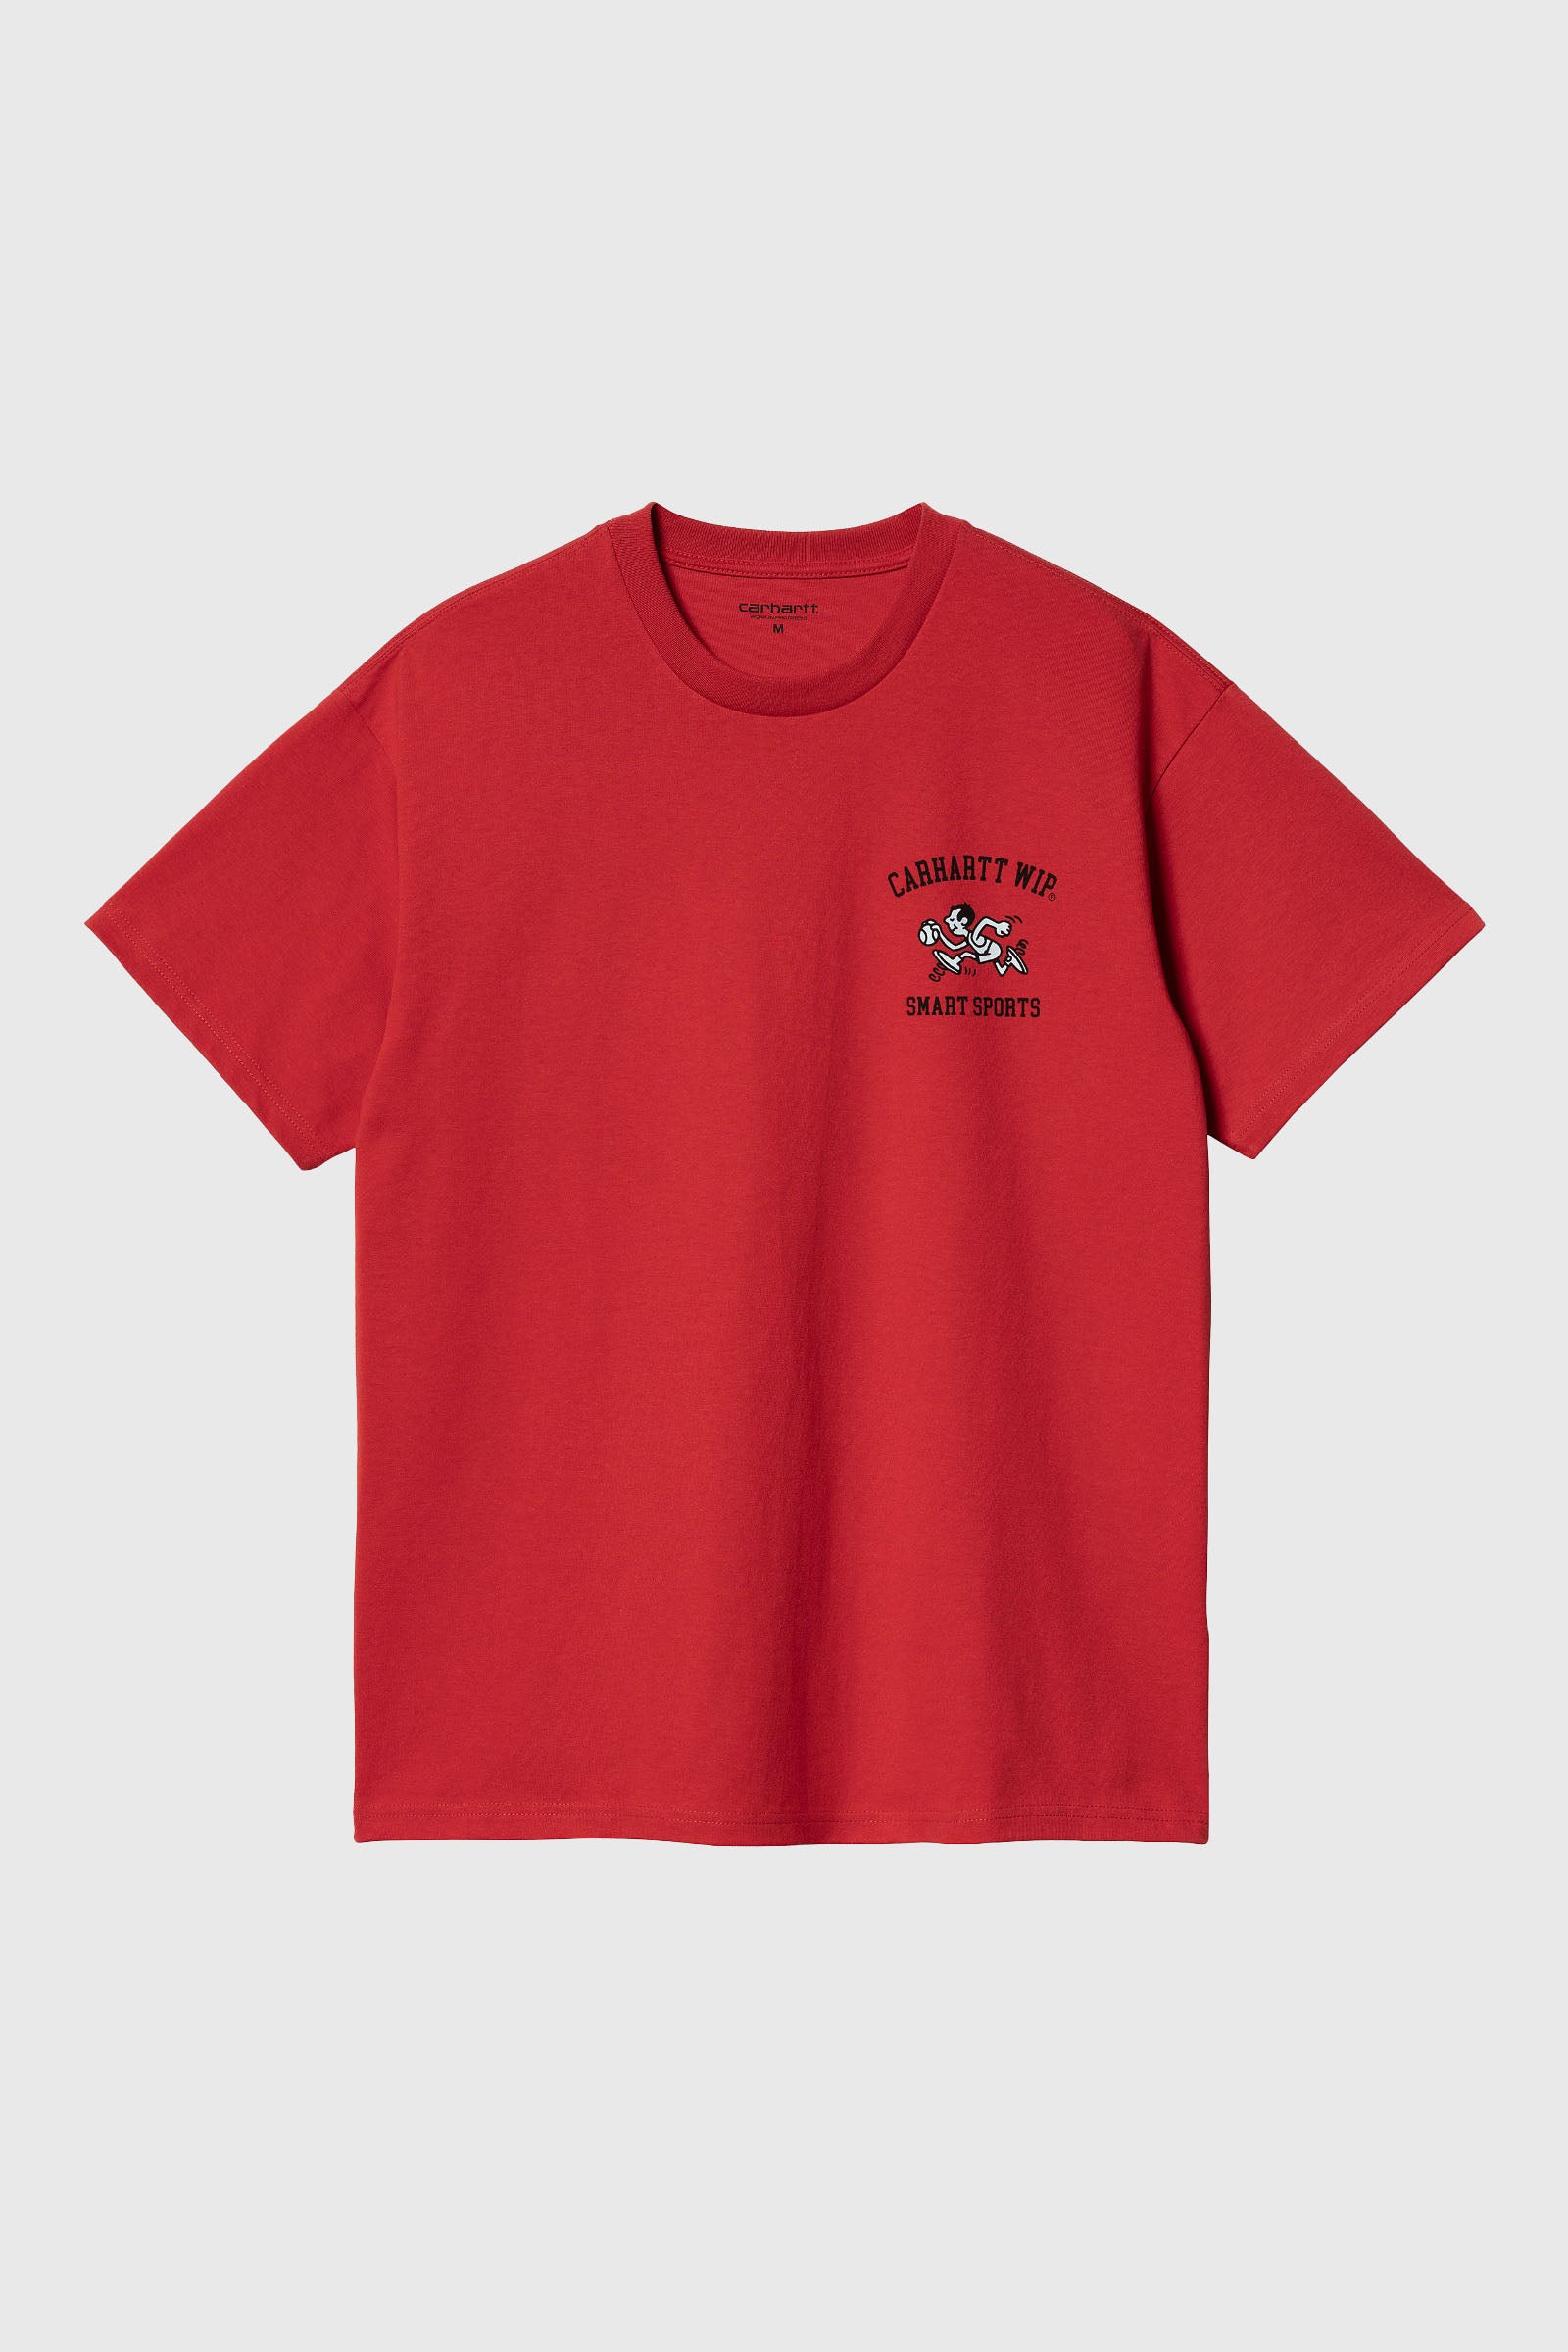 Carhartt WIP T-Shirt S/S Smart Sports Cotone Rosso - 3